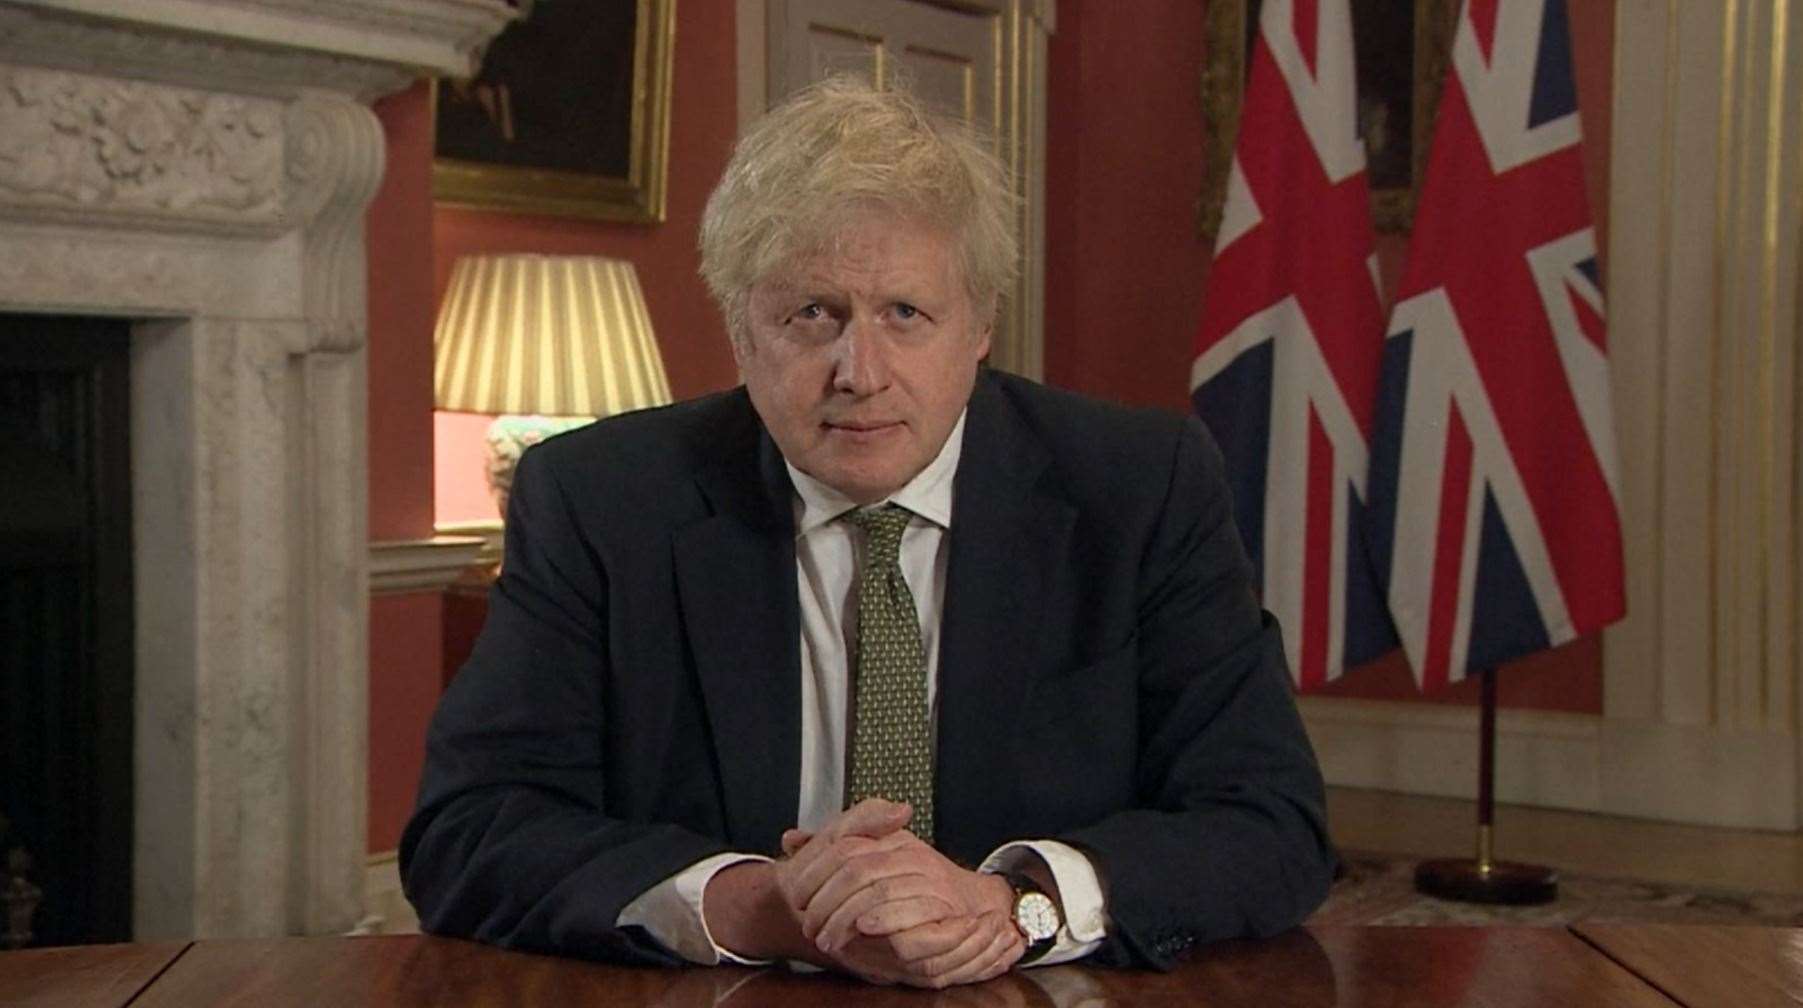 Prime Minister Boris Johnson put the country into national lockdown on Monday